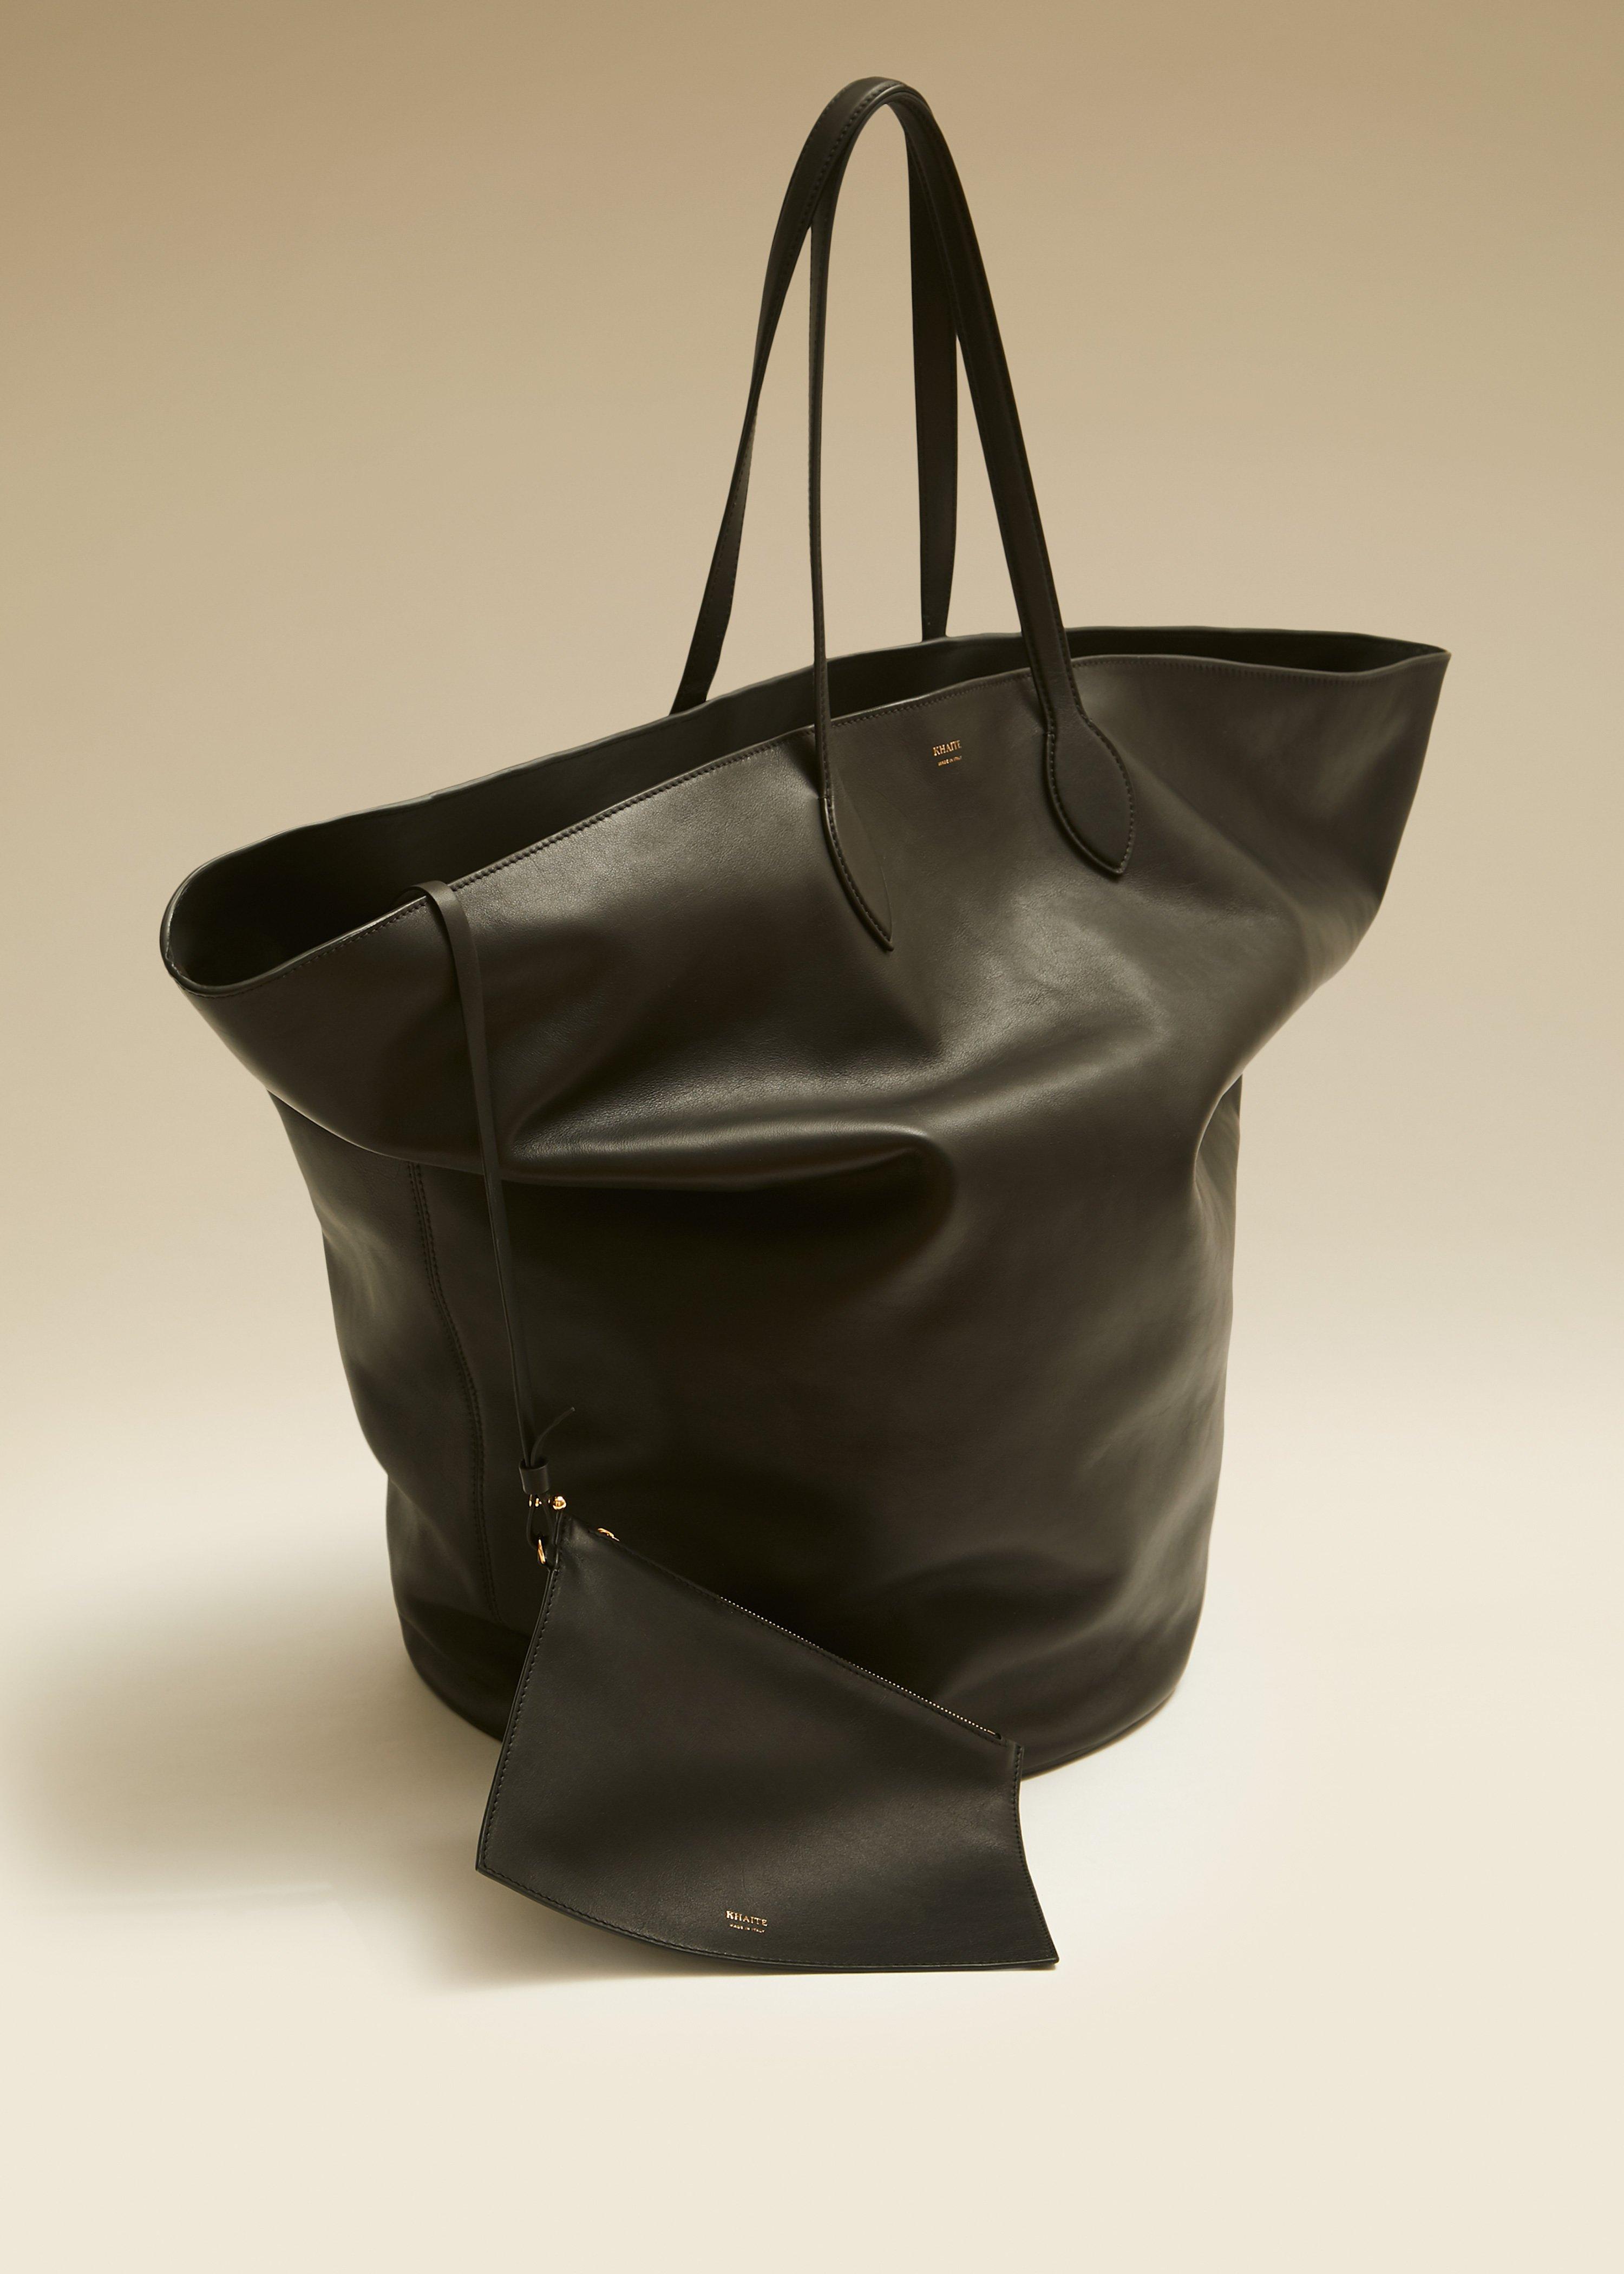 The Large Osa Tote